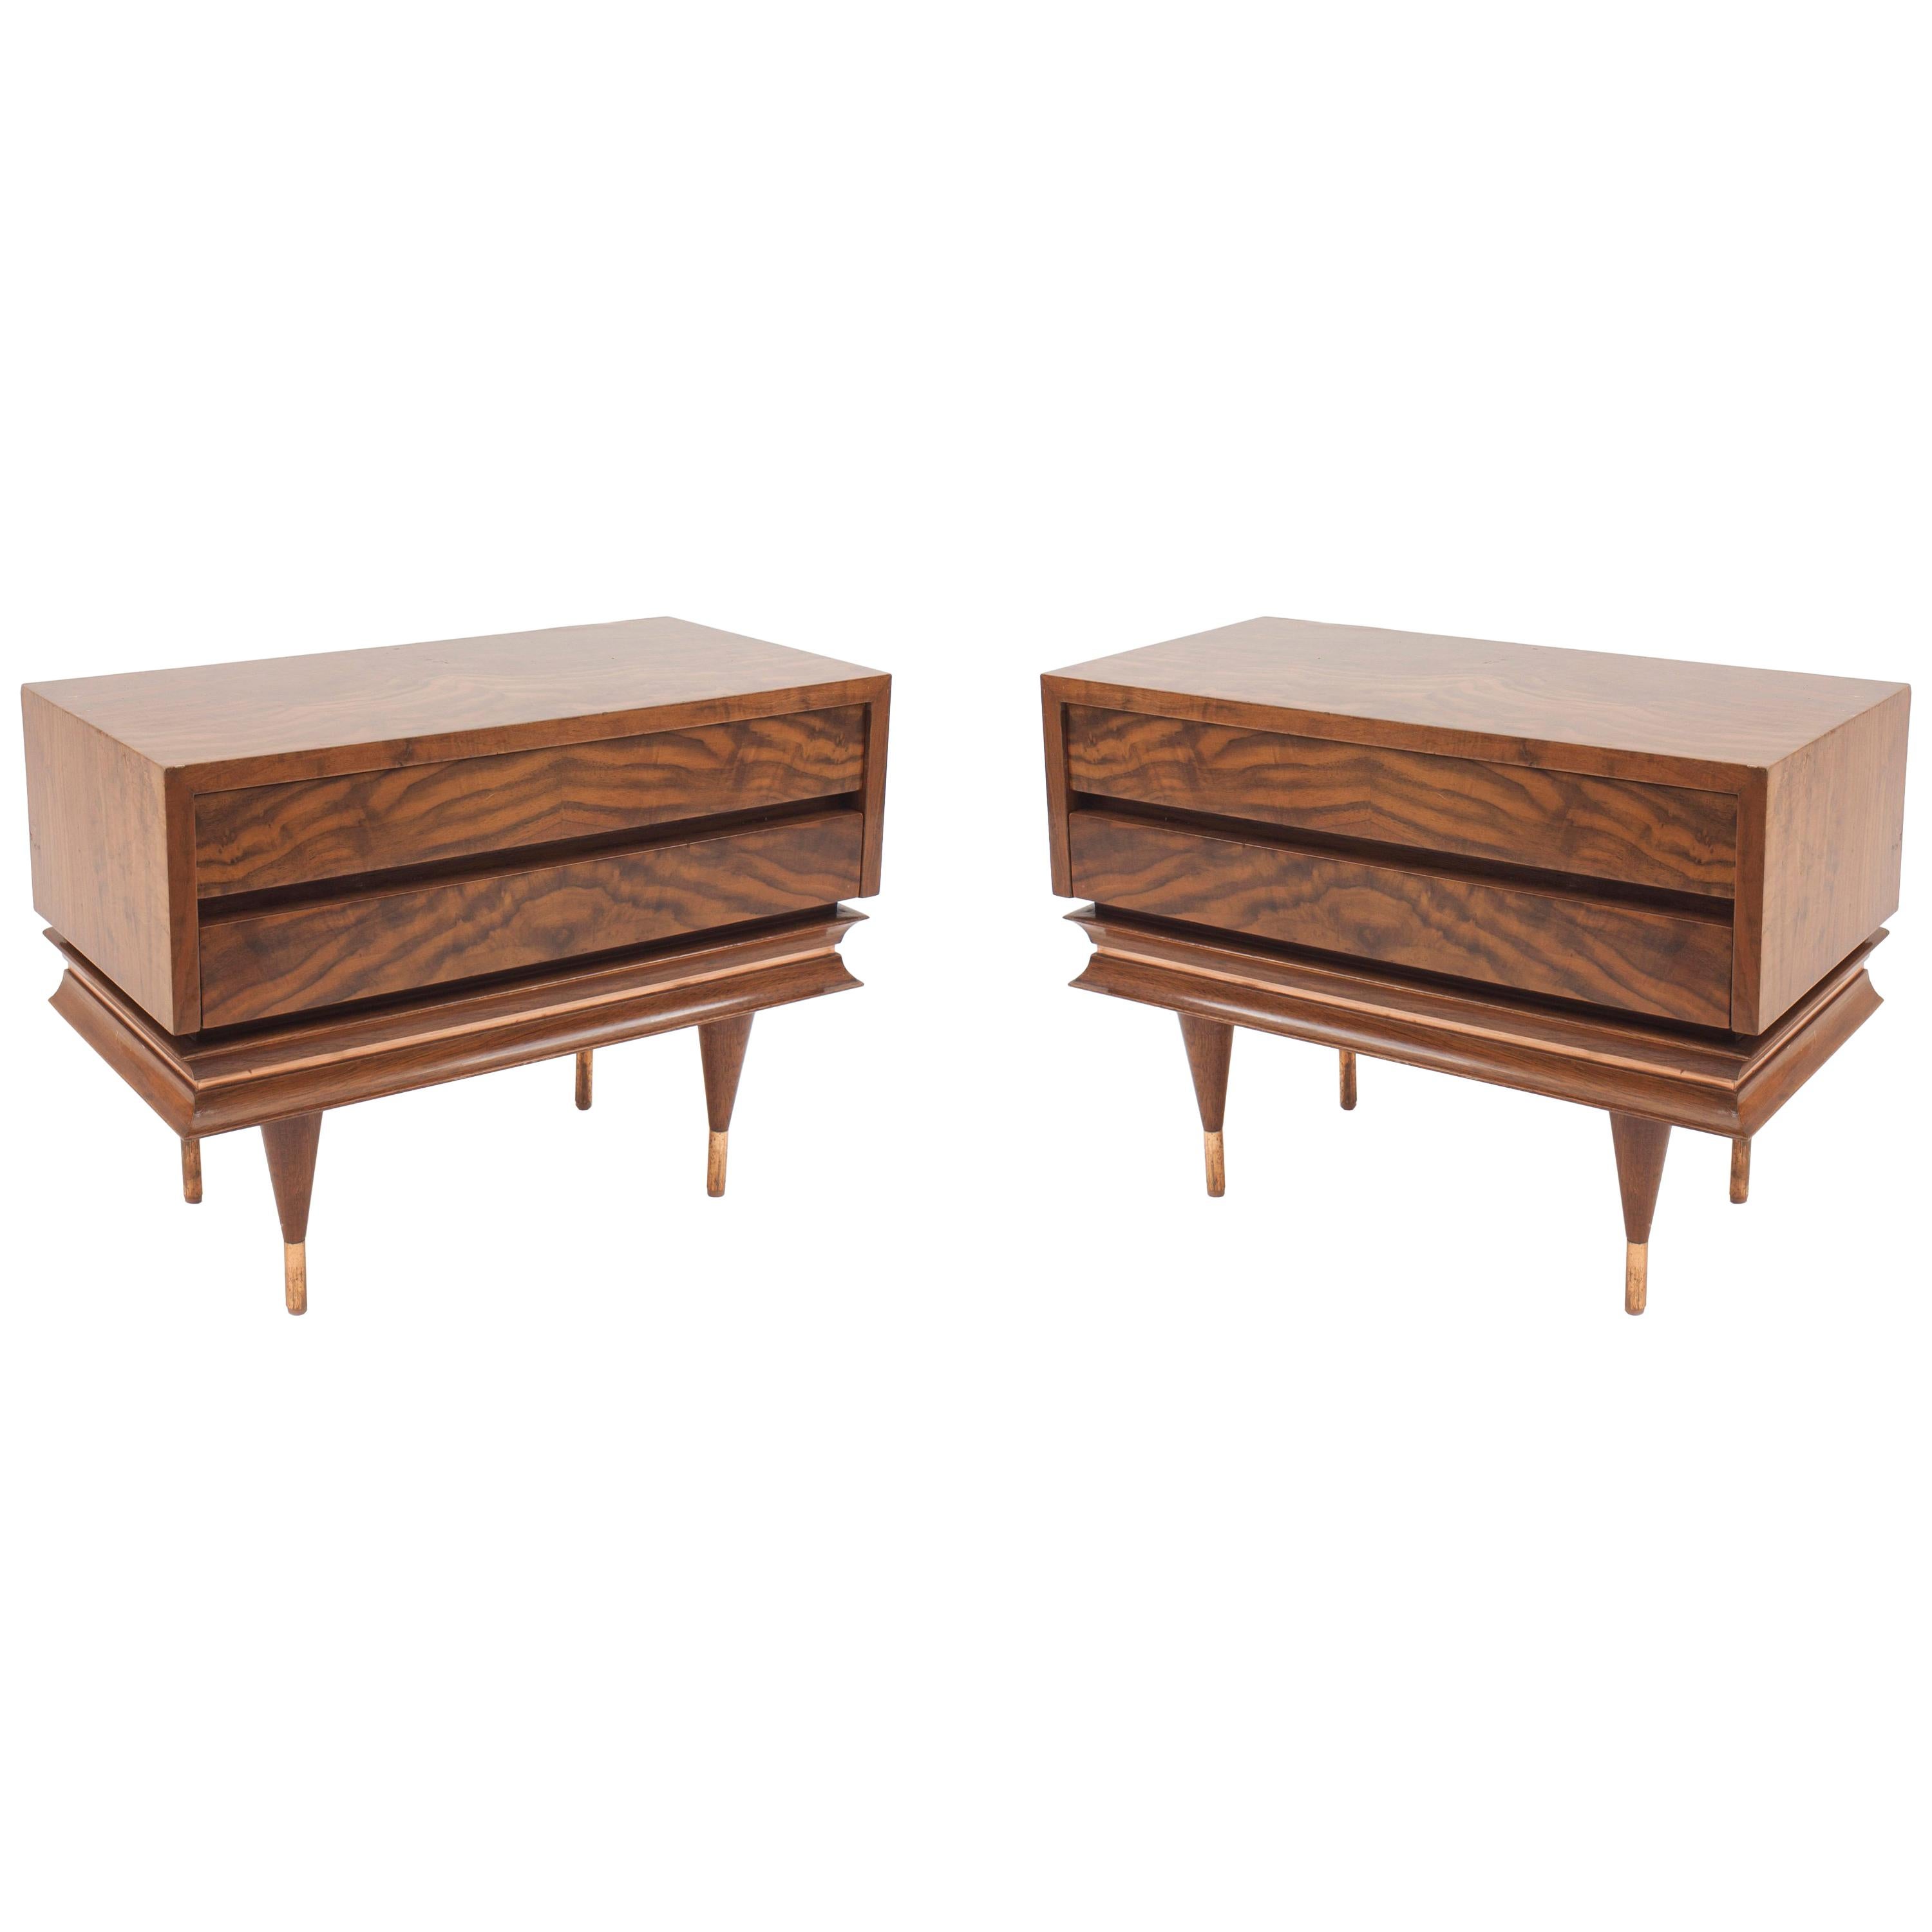 Pair of Italian Post-War Gio Ponti Low Chest or End Tables